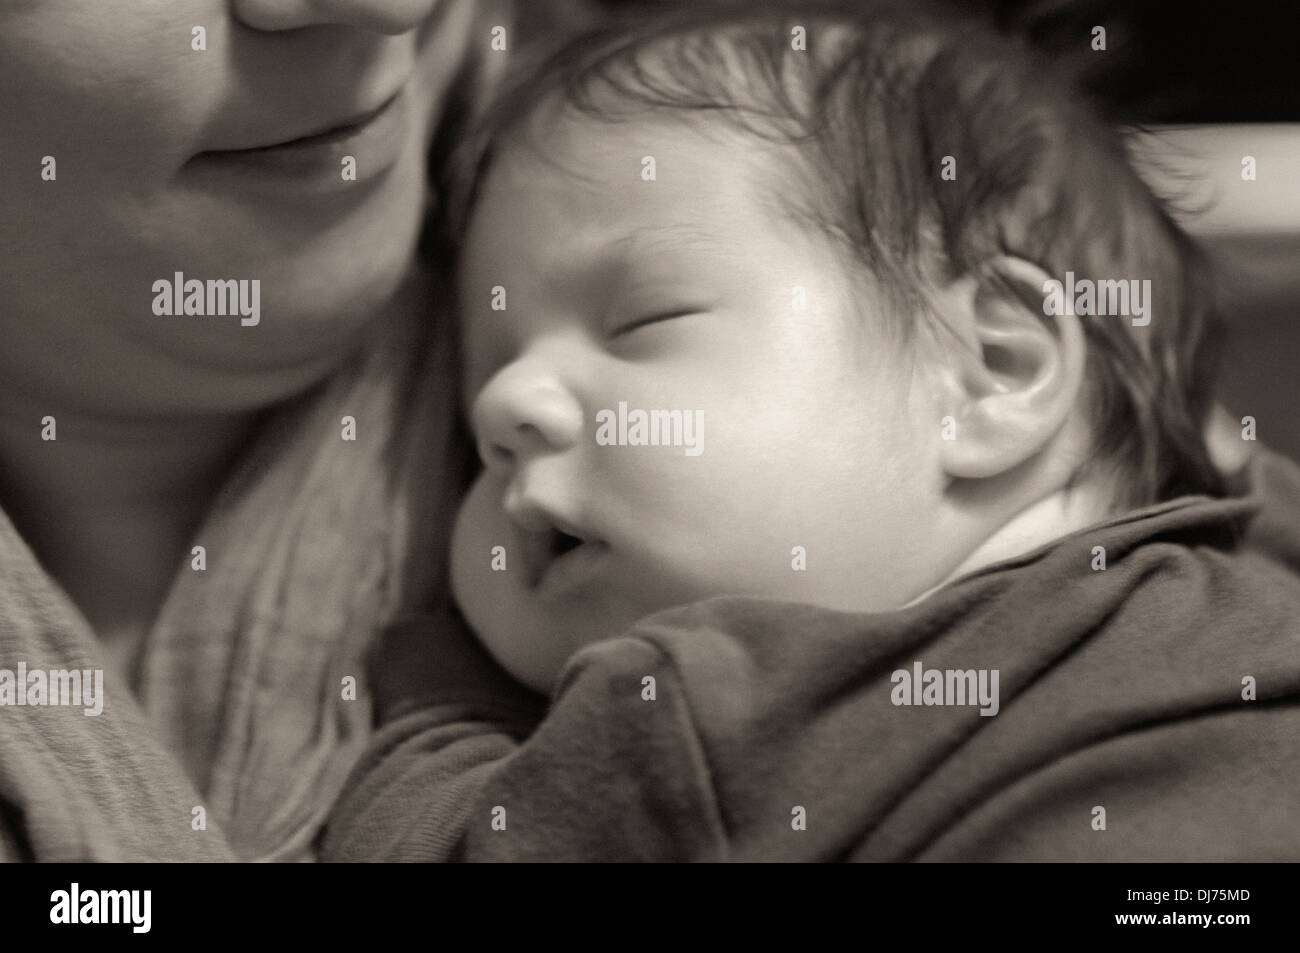 Mother Holding Her Sleeping New Baby Boy Stock Photo